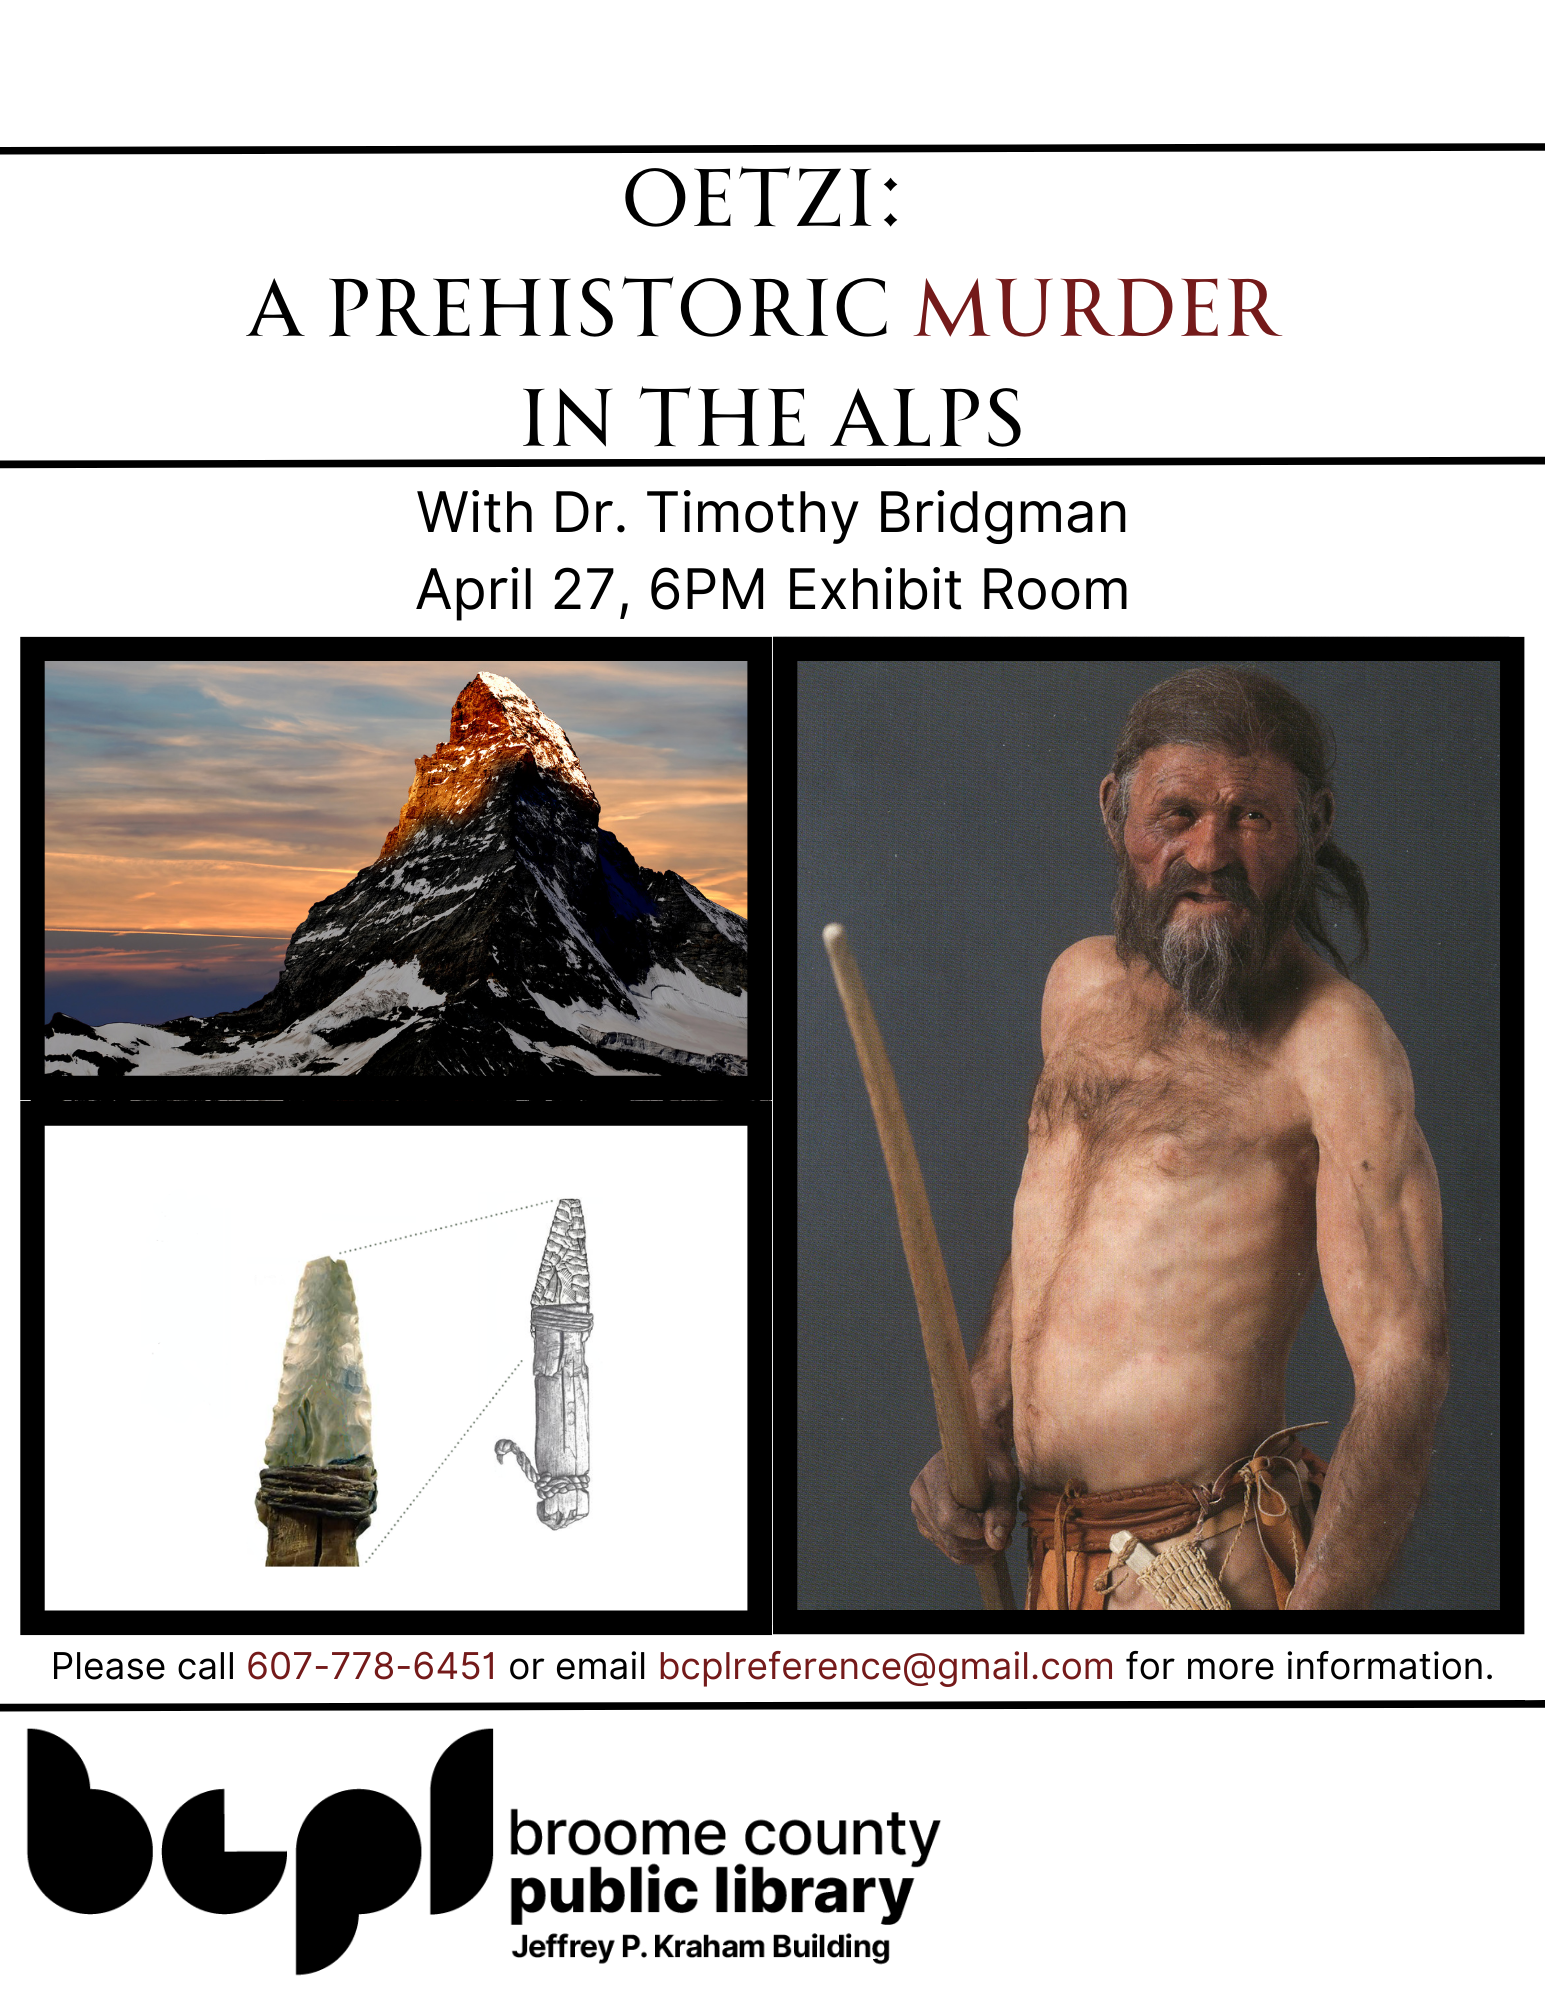 Oetzi: A Prehistoric Murder in the Alps with Dr. Timothy Bridgman, April 27, 6PM, Exhibit Room Broom County Public Library Please call 607-778-6451 or email bcplreference@gmail.com for more information